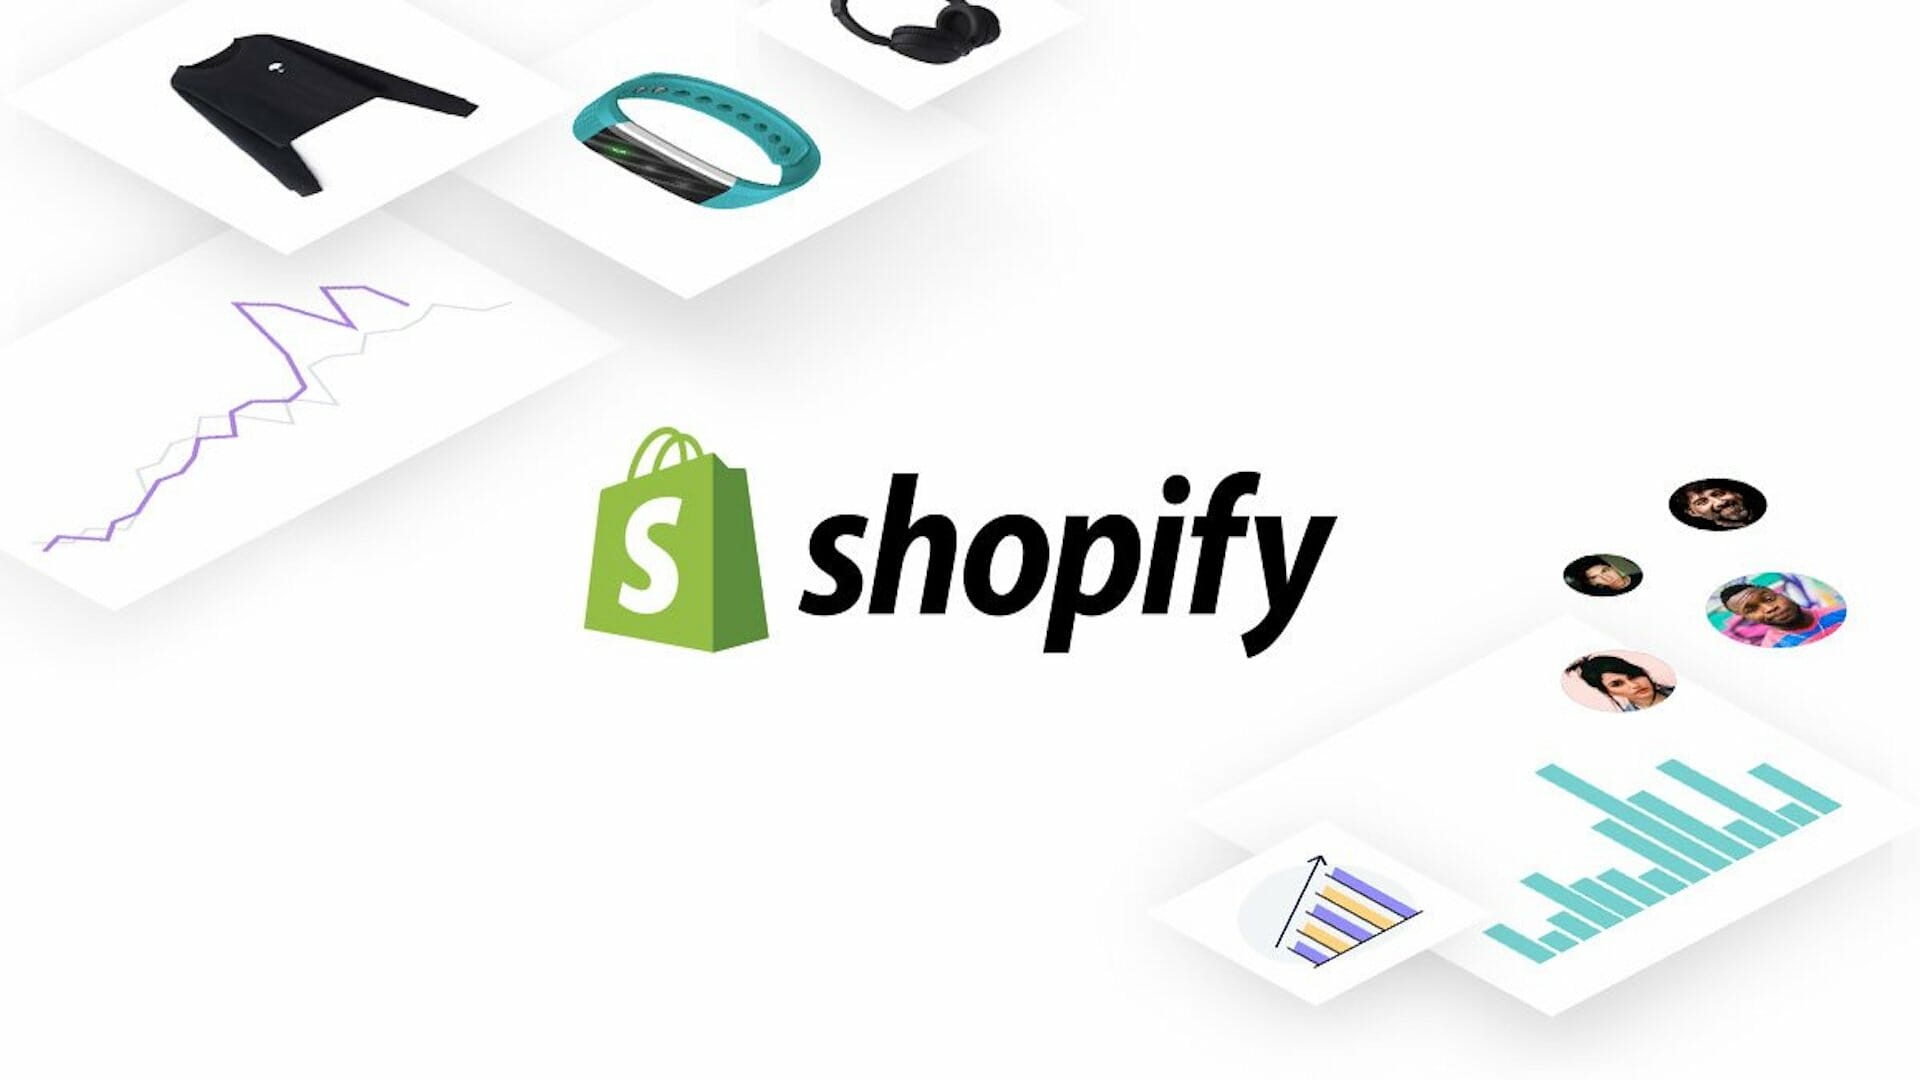 E-Commerce Giant Shopify is recruiting for a CTO